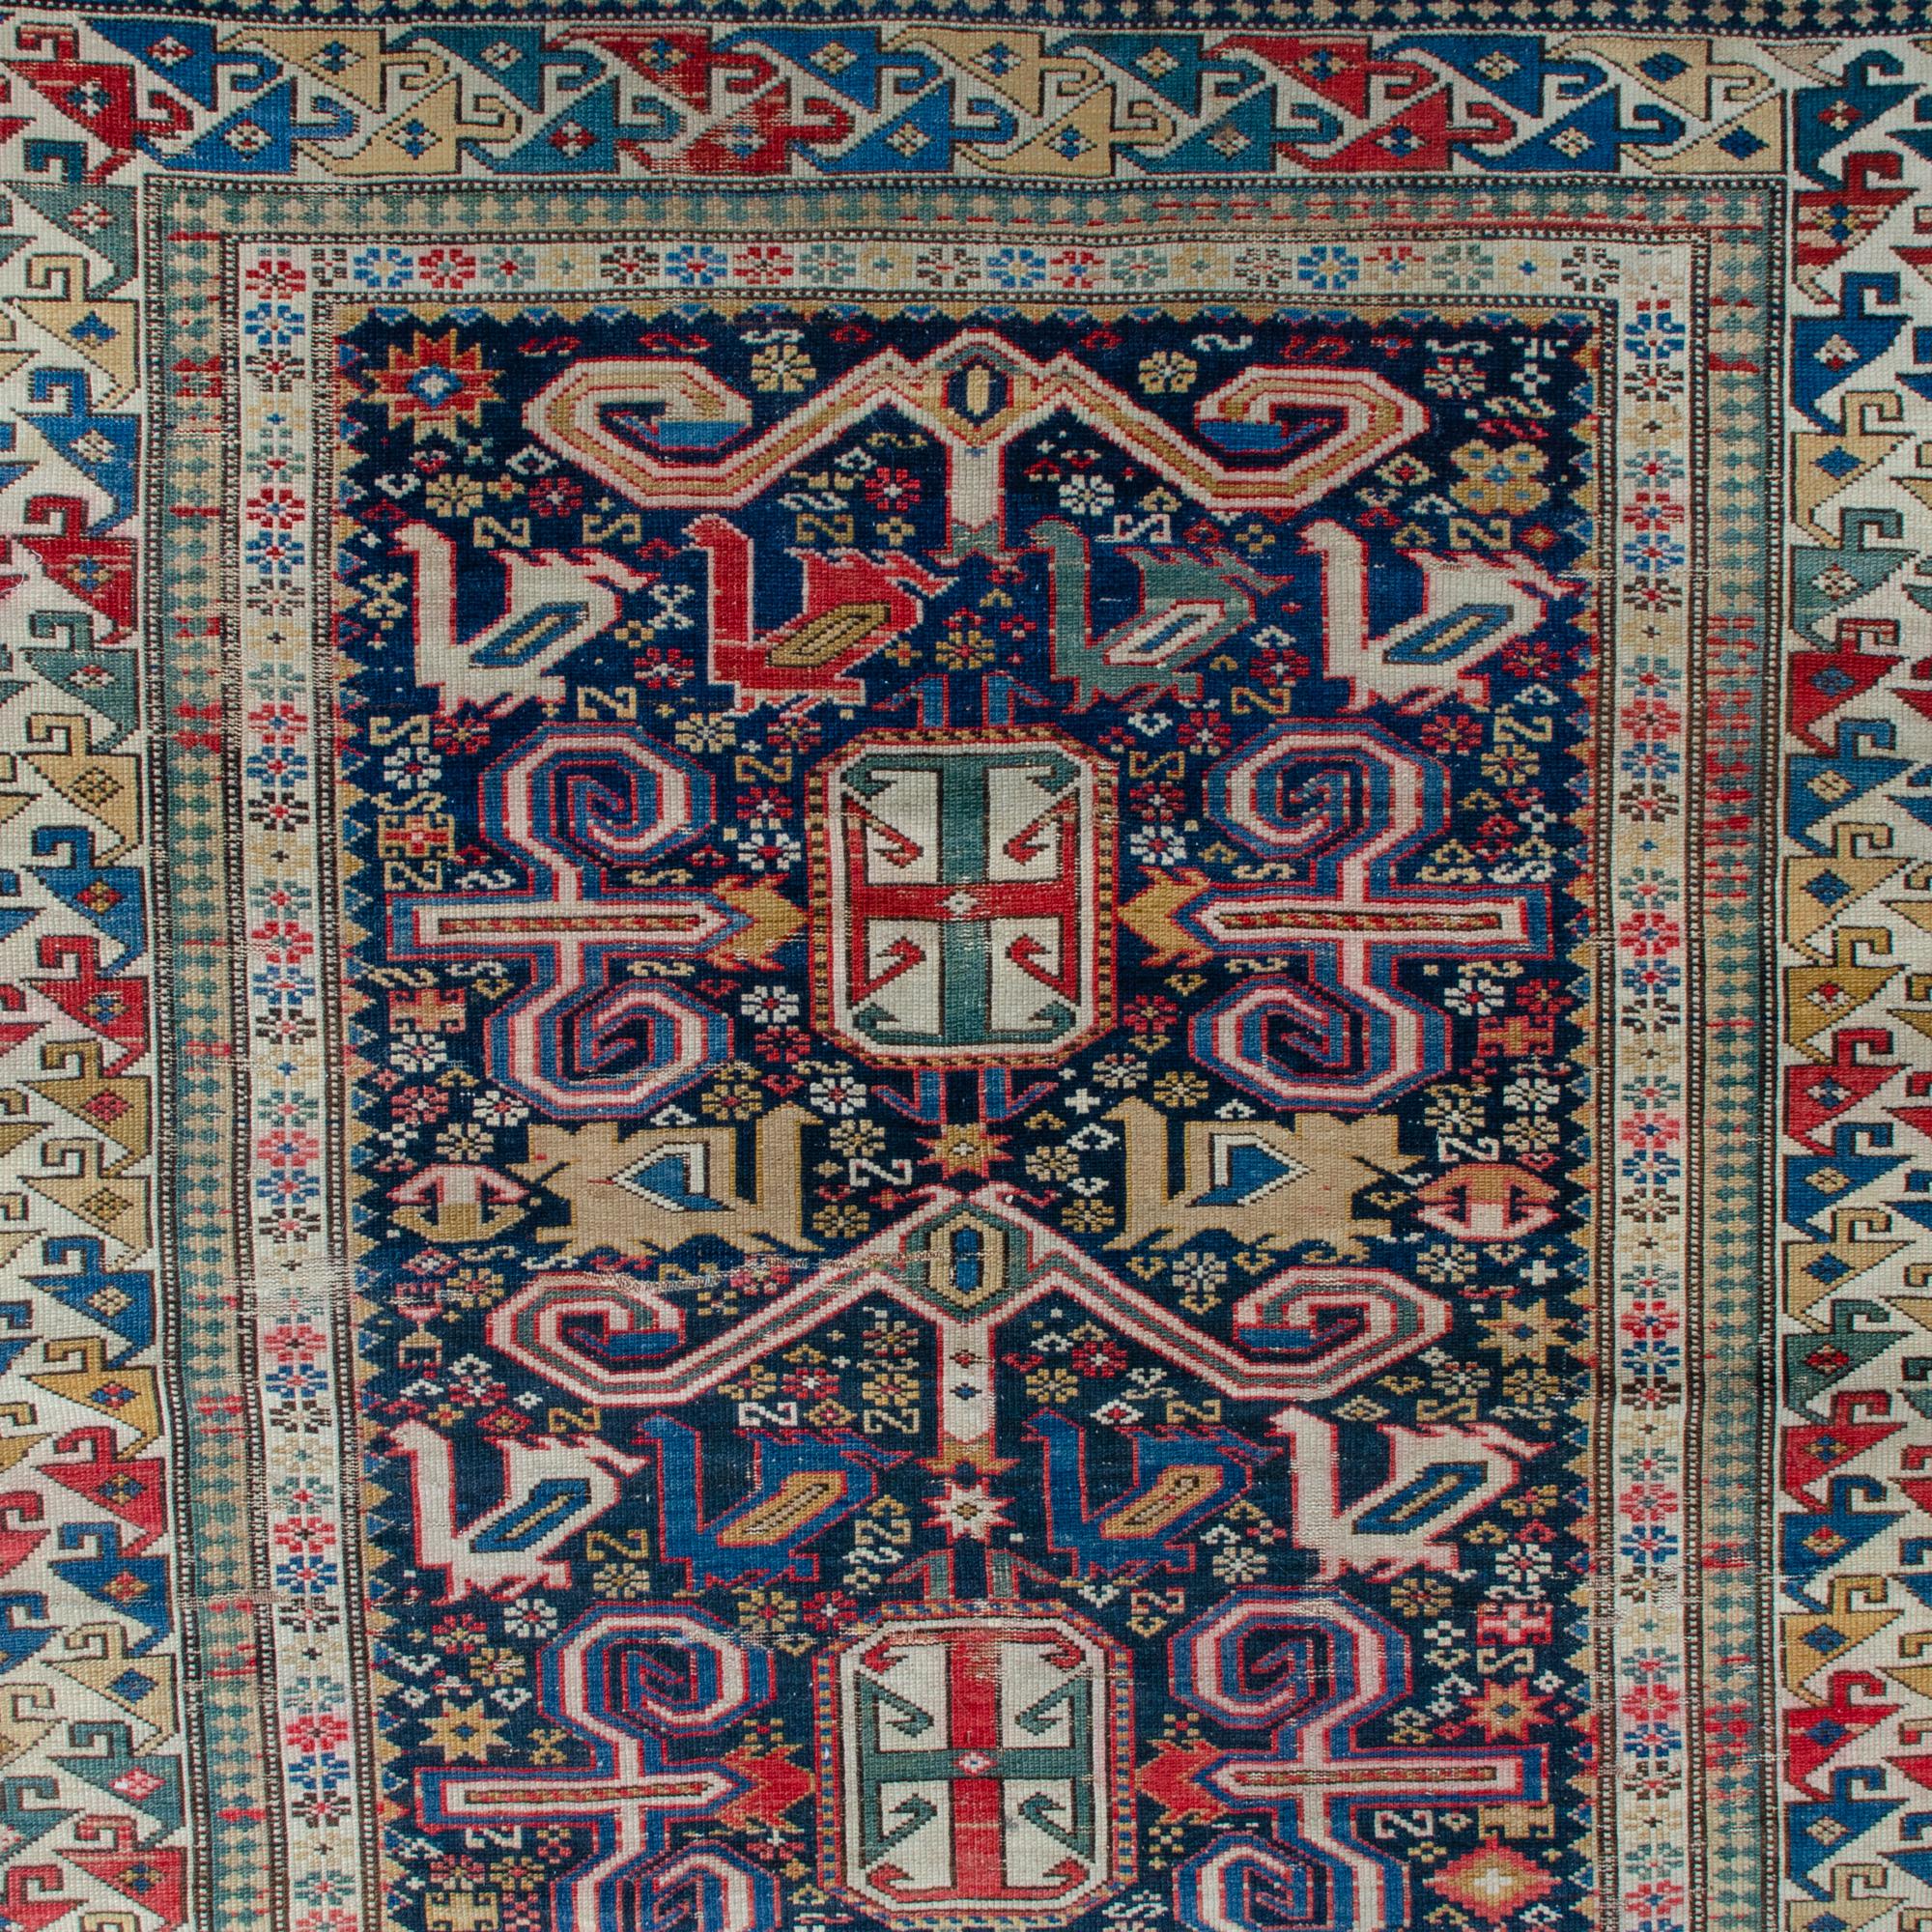 A unusual and collectible antique Caucasian Kuba district Perepedil rug, circa 1900.

An electric field with saturated colors surround the perepedil ram’s horn motif. With eagle’s beak border and other elements uncommon for a Perepedil rug.

45 ¾